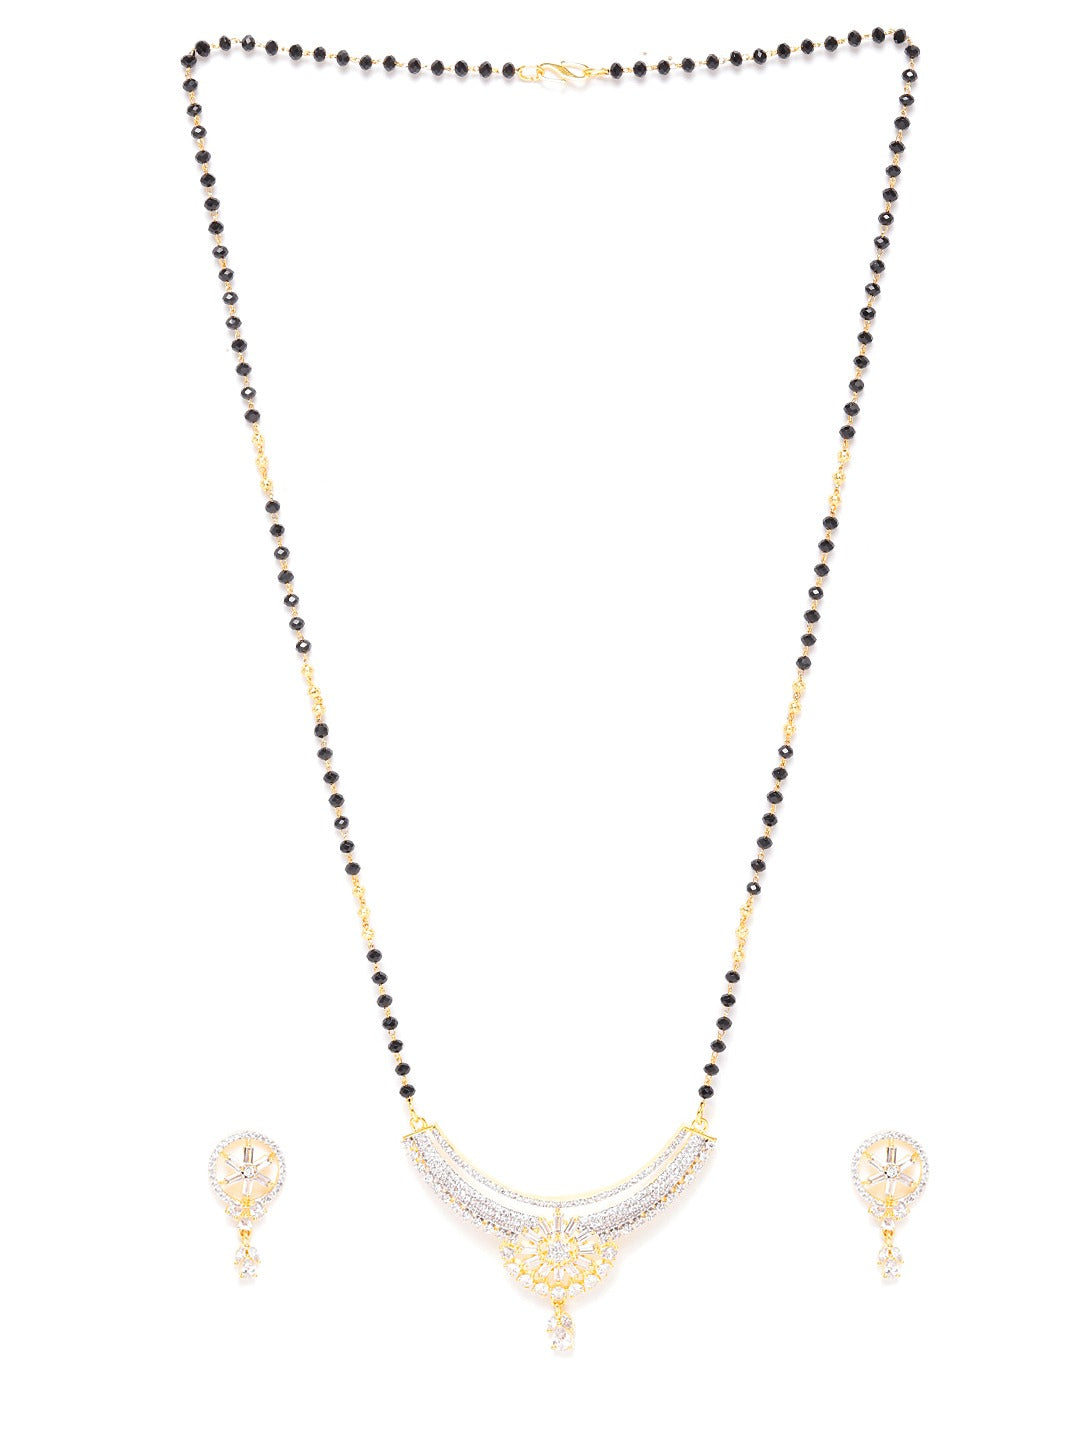 Black Gold-Plated AD-Studded Mangalsutra & Earrings Set